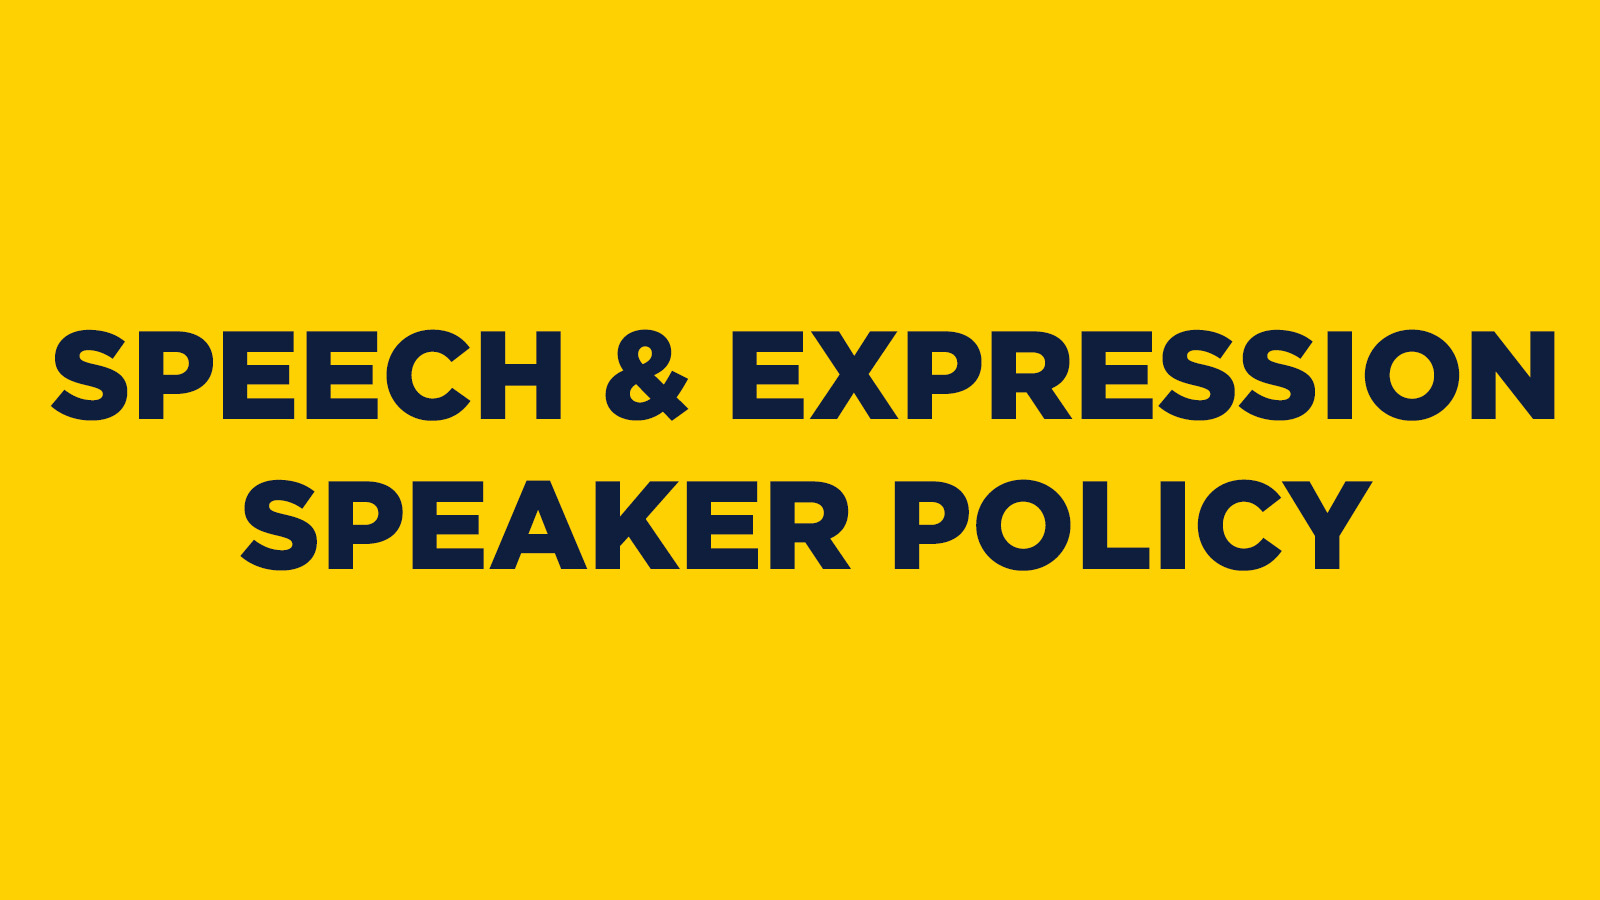 SPEAKER POLICY